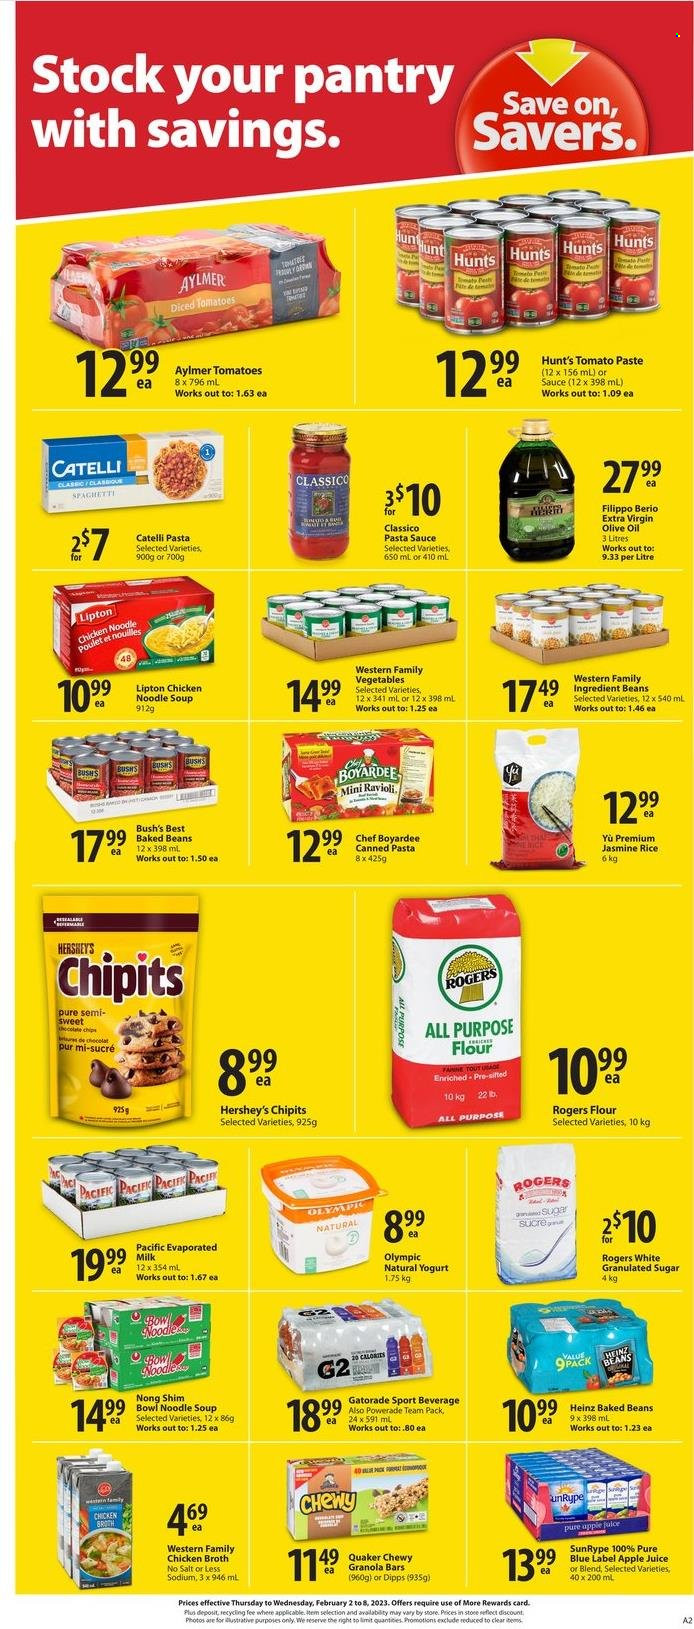 thumbnail - Save-On-Foods Flyer - February 02, 2023 - February 08, 2023 - Sales products - beans, spaghetti, pasta sauce, soup, noodles cup, Quaker, noodles, yoghurt, milk, Hershey's, chips, all purpose flour, flour, granulated sugar, sugar, chicken broth, broth, tomato paste, baked beans, Chef Boyardee, diced tomatoes, granola bar, rice, jasmine rice, Classico, extra virgin olive oil, olive oil, oil, apple juice, Powerade, juice, Gatorade, Heinz, Lipton. Page 2.